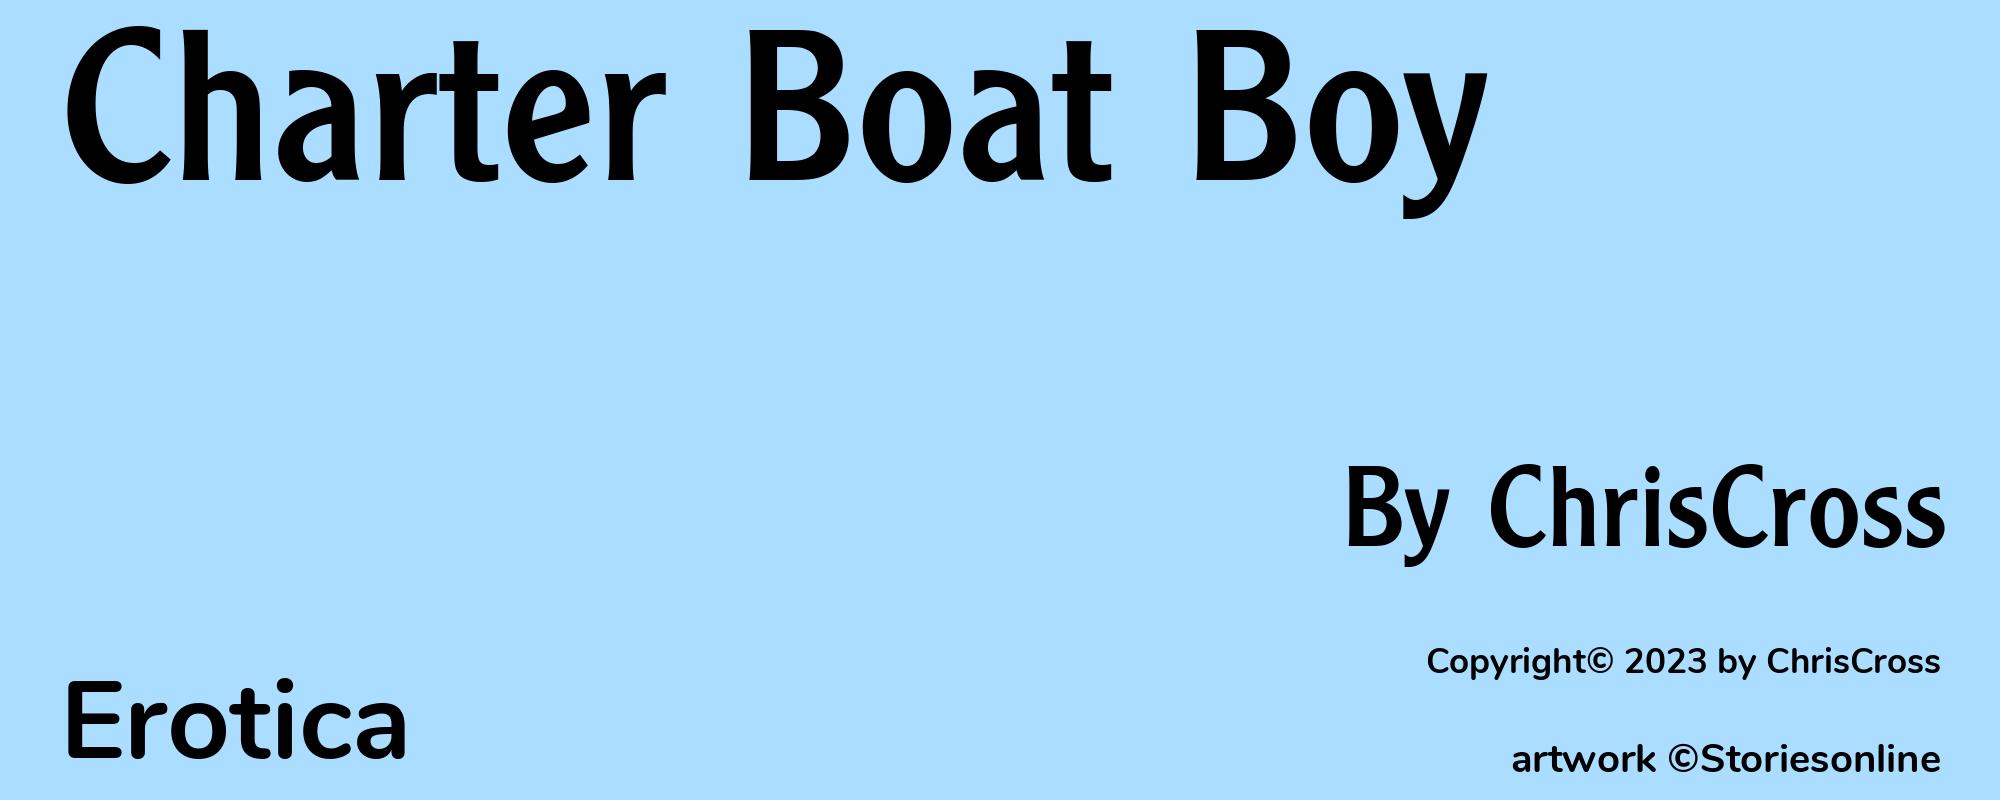 Charter Boat Boy - Cover